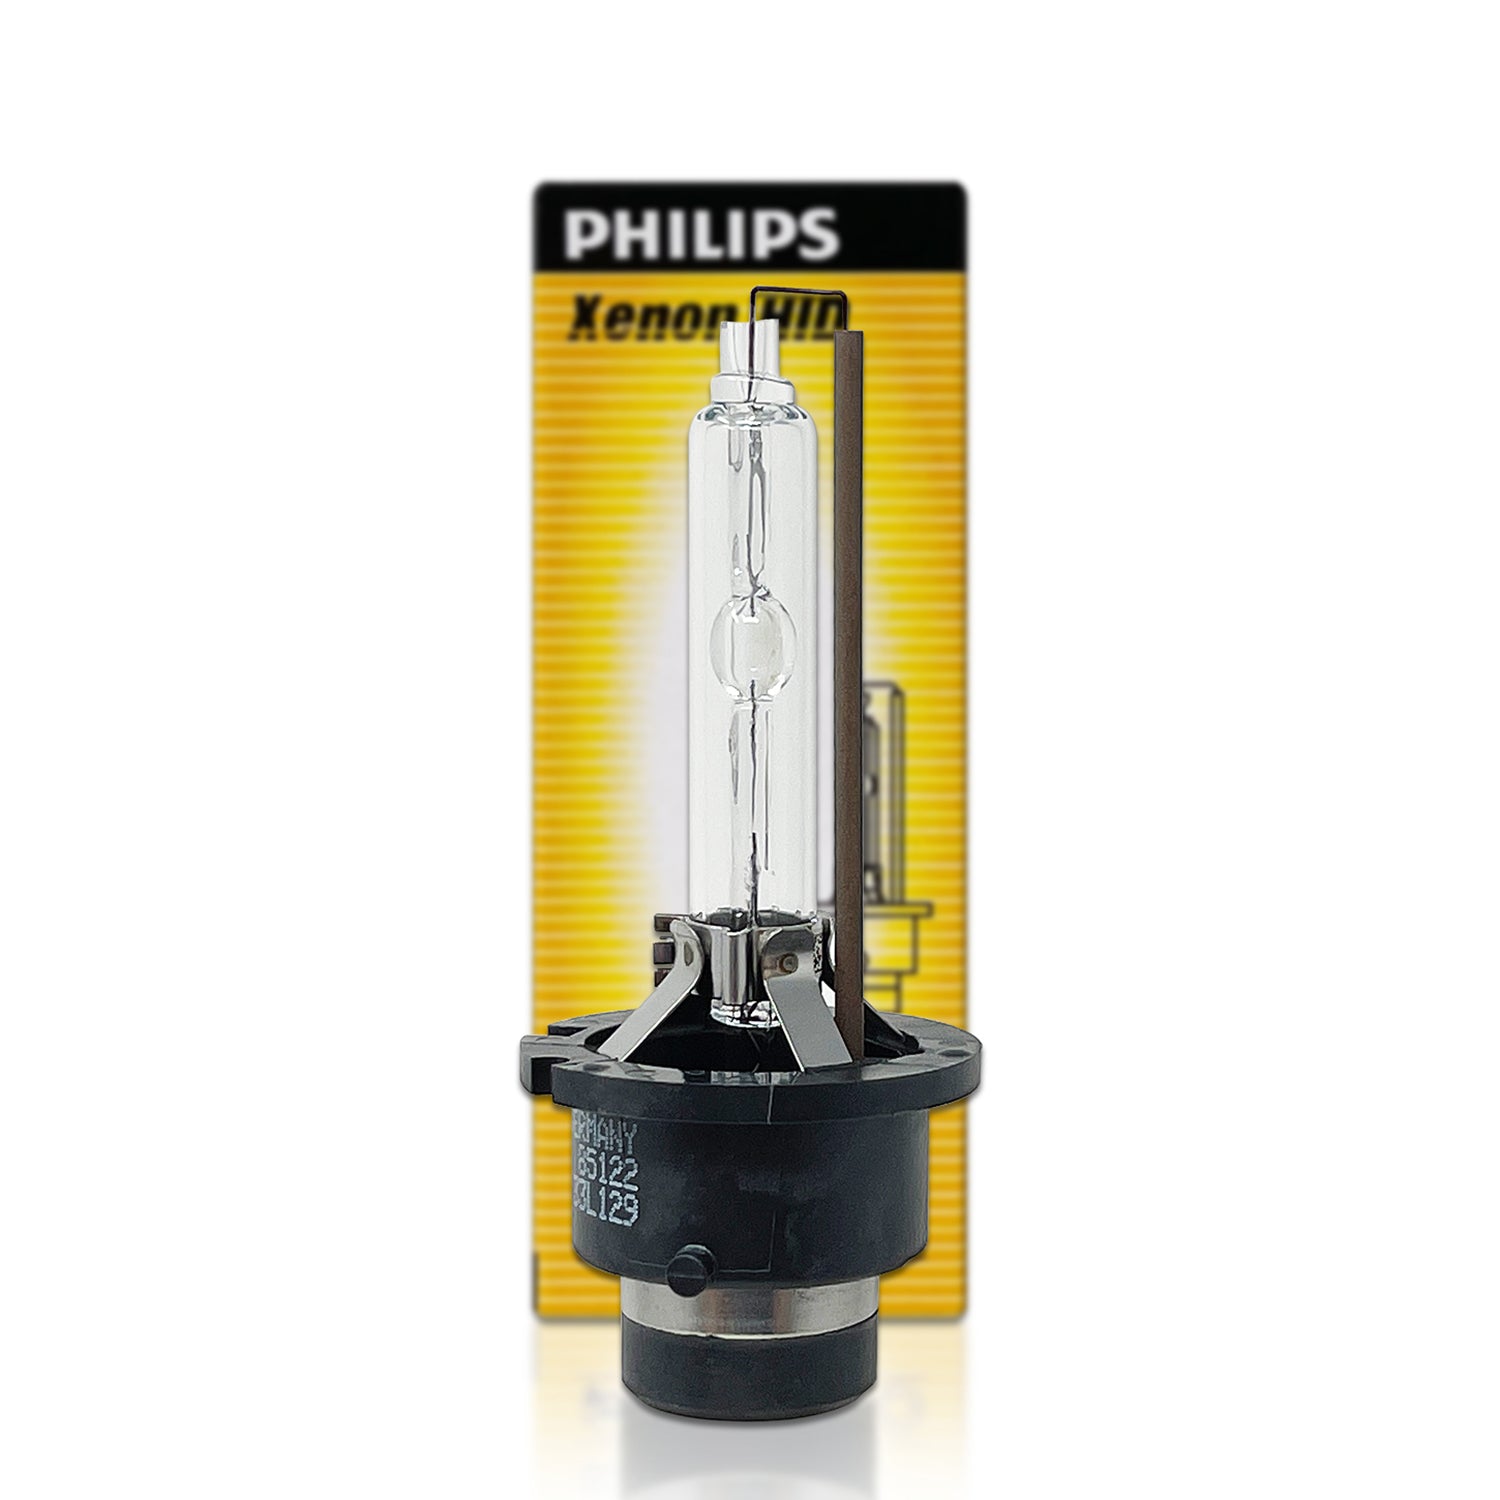 PHILIPS - 85122C1 Philips D2S Standard Authentic Xenon HID Headlight Bulb,  1 Pack